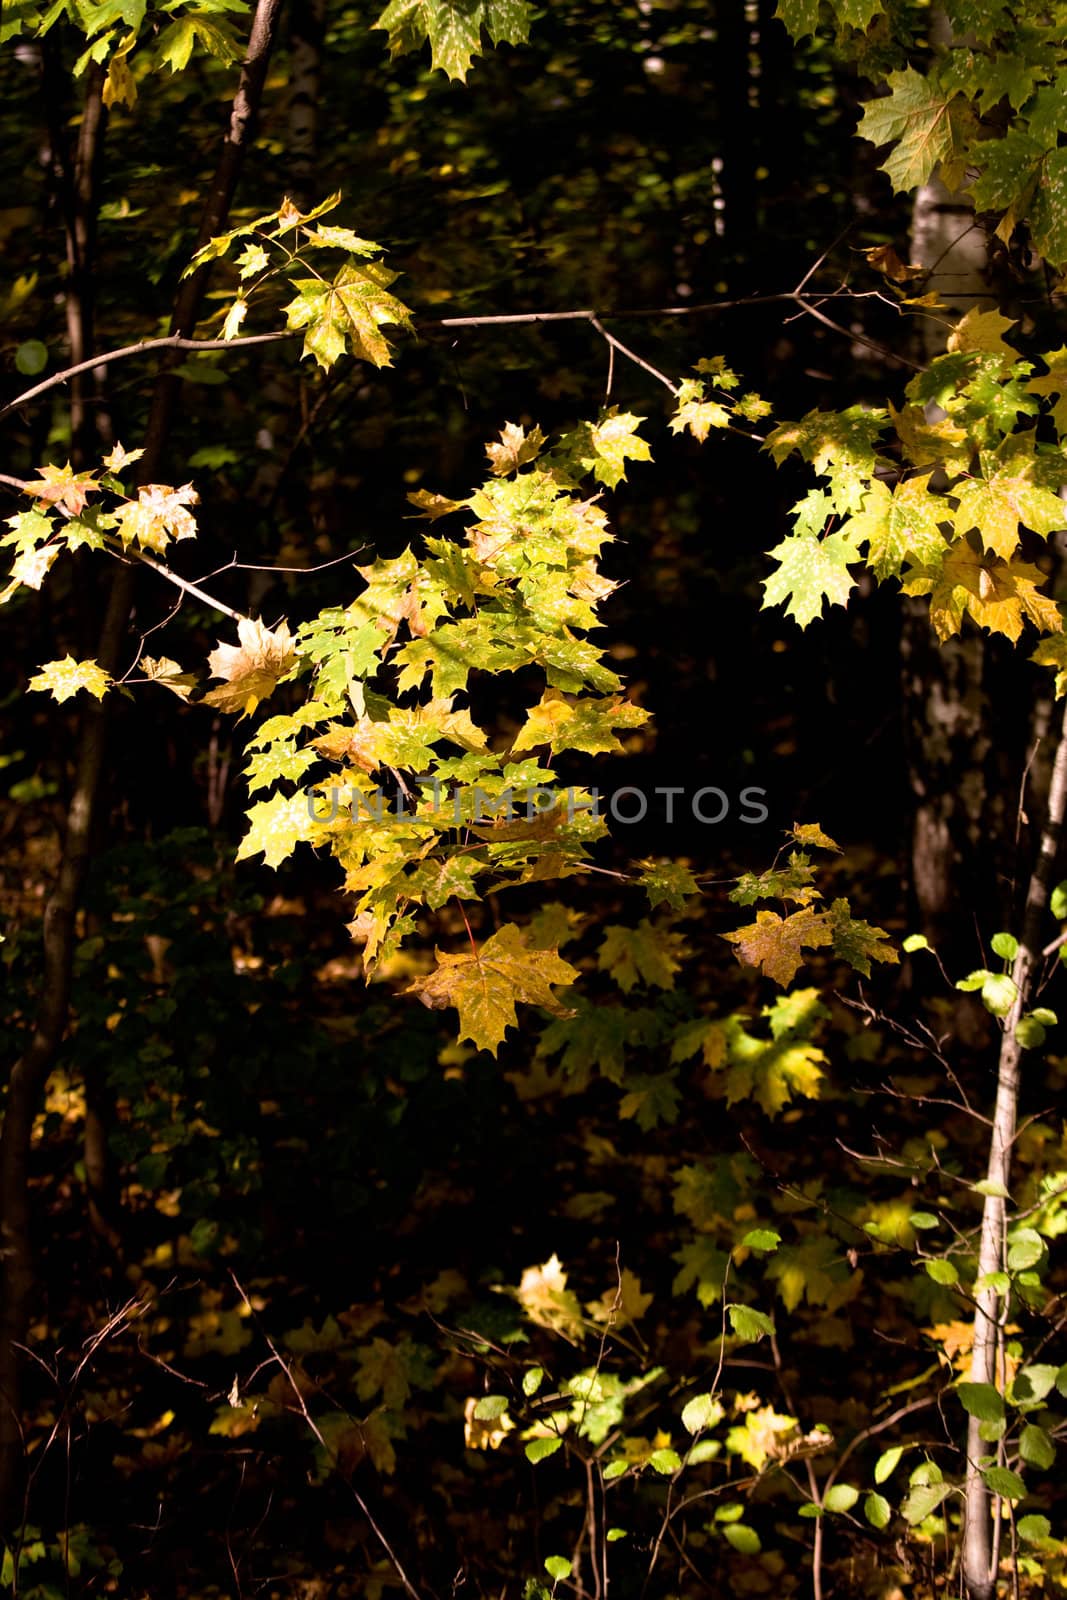 maple yellow leaves in autumn forest
